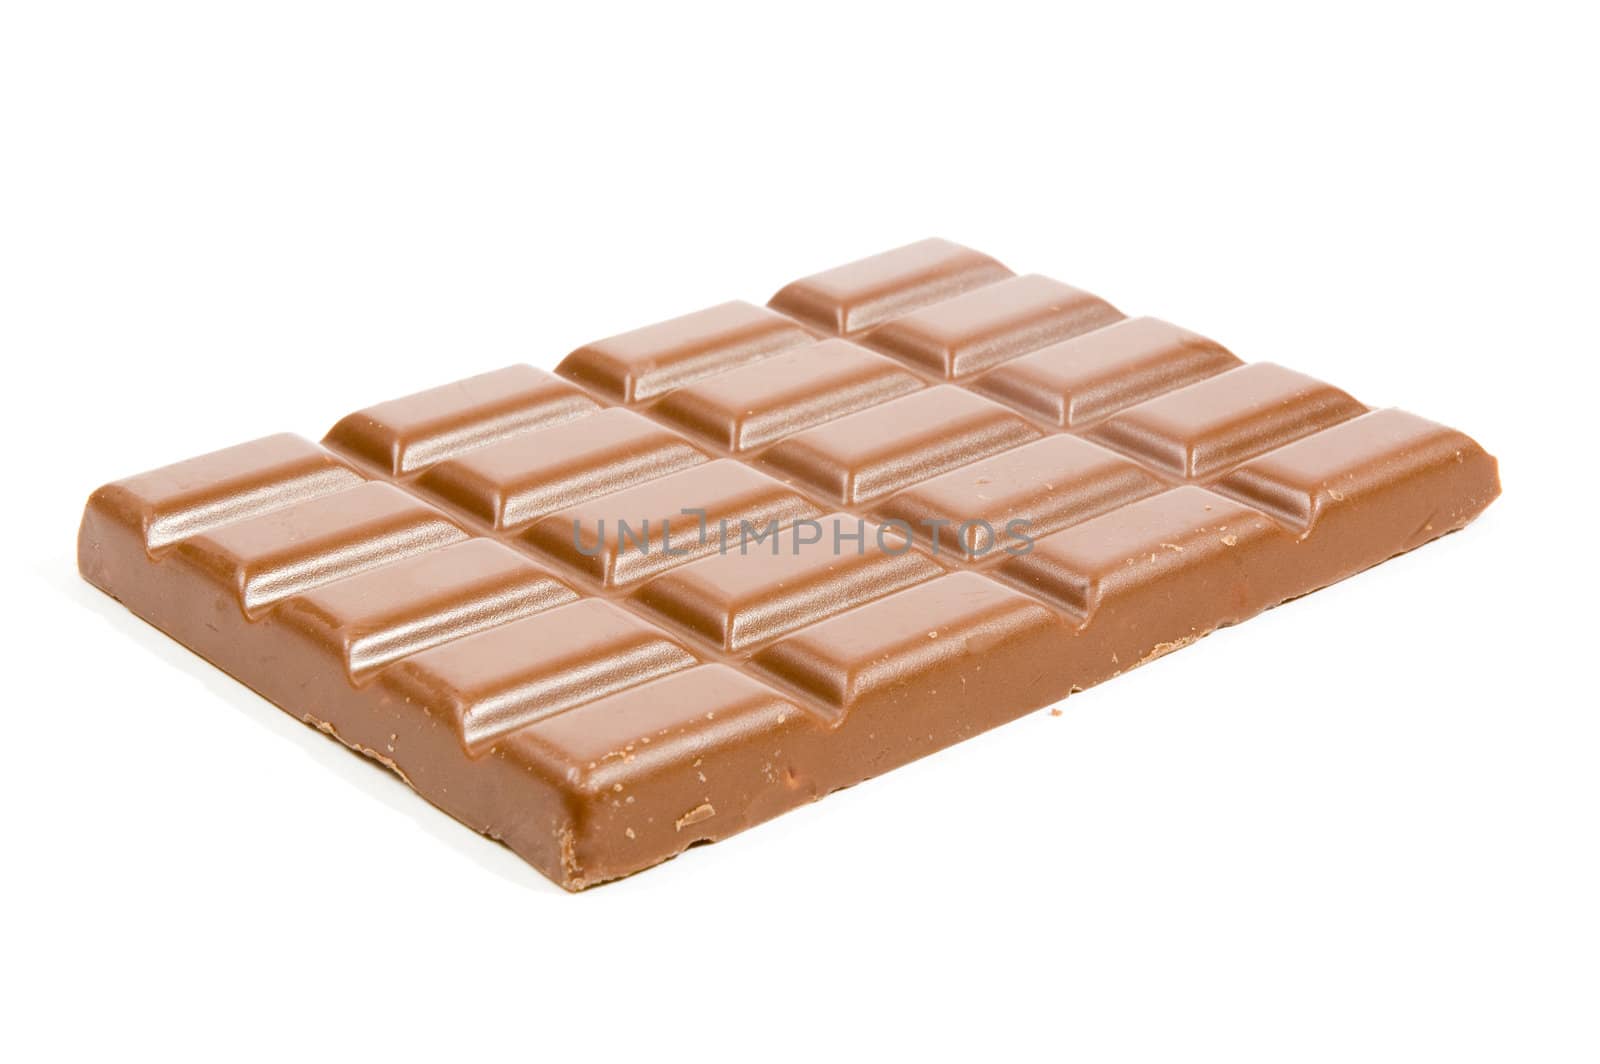 A chocolate bar isolated on white background by ladyminnie